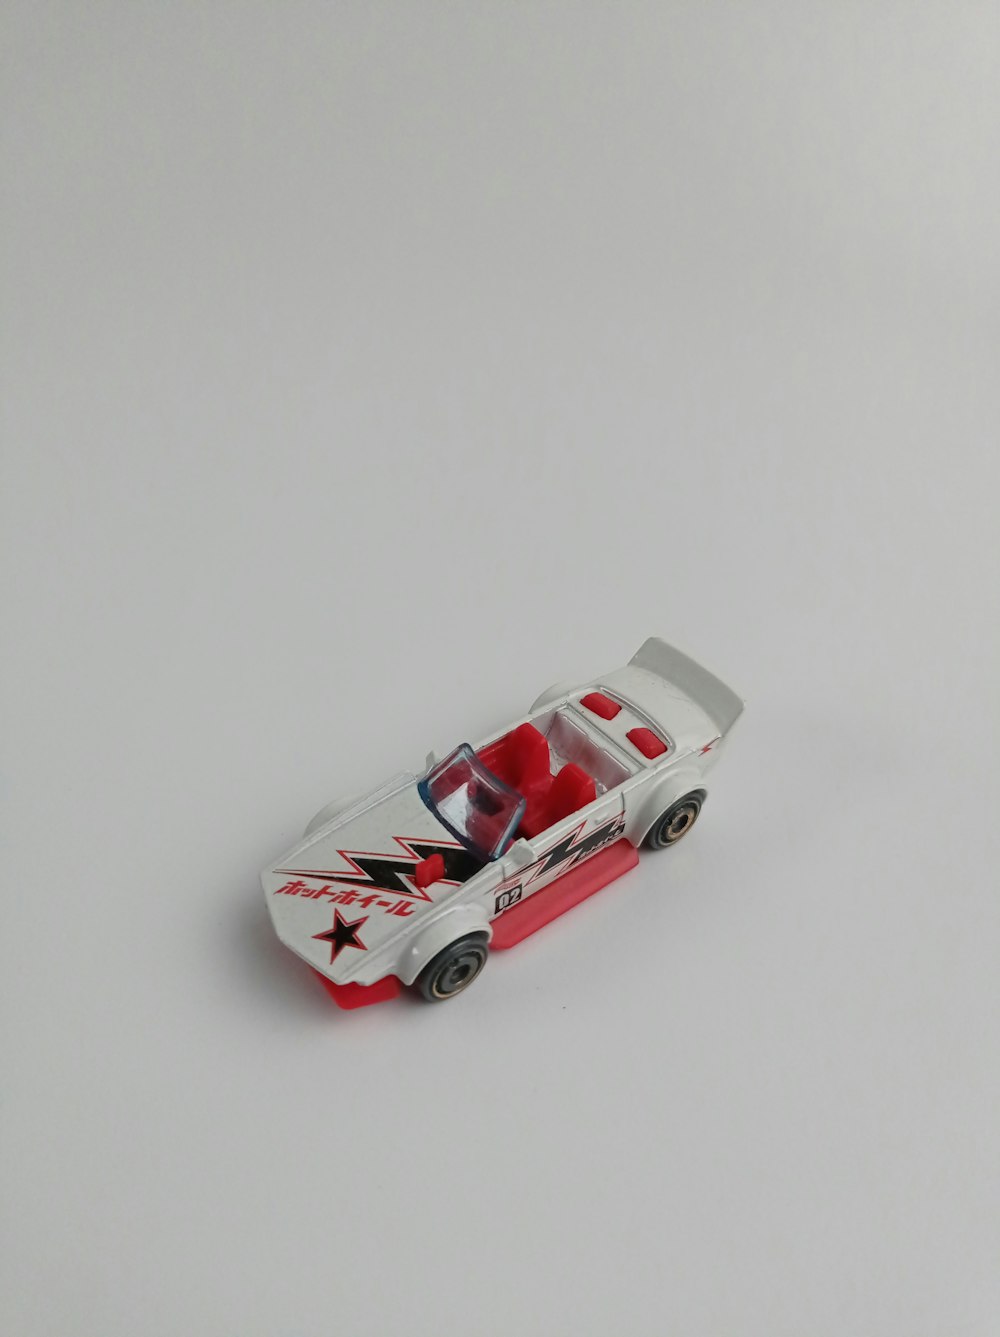 a red and white toy car on a white surface